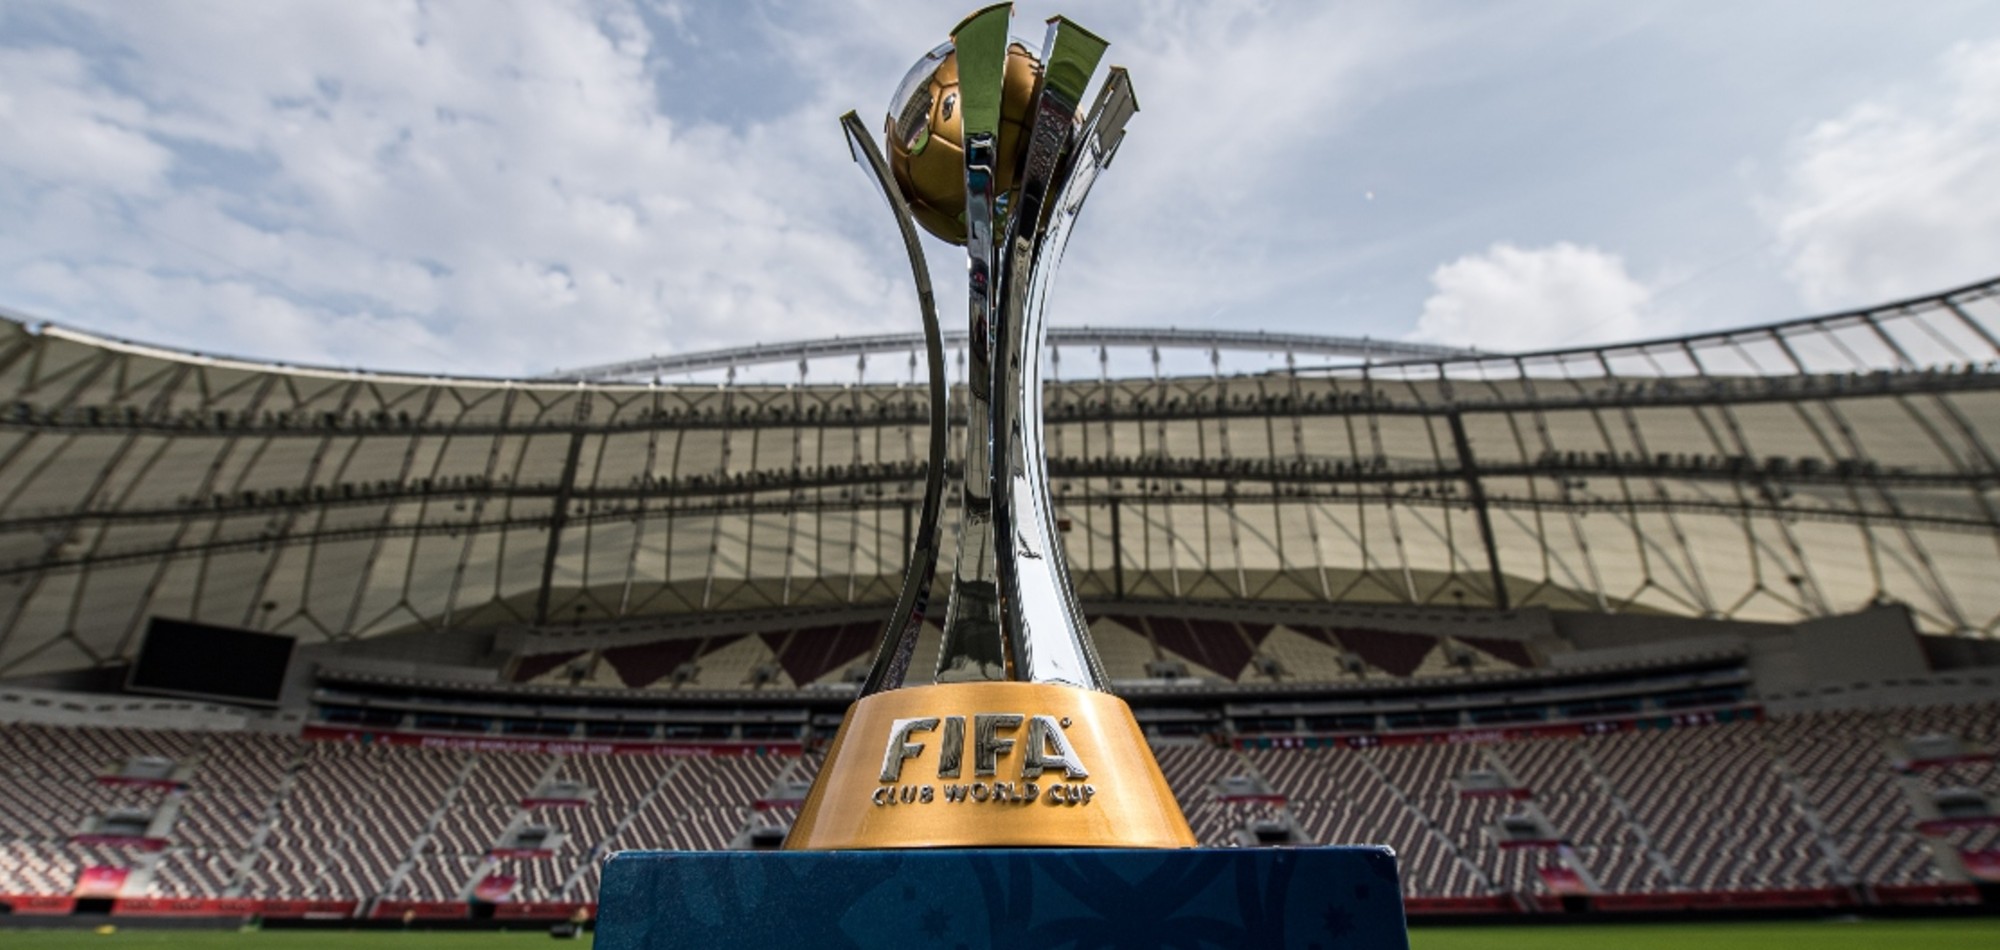 Presale offers exclusive chance to purchase FIFA Club World Cup Qatar 2020™ tickets